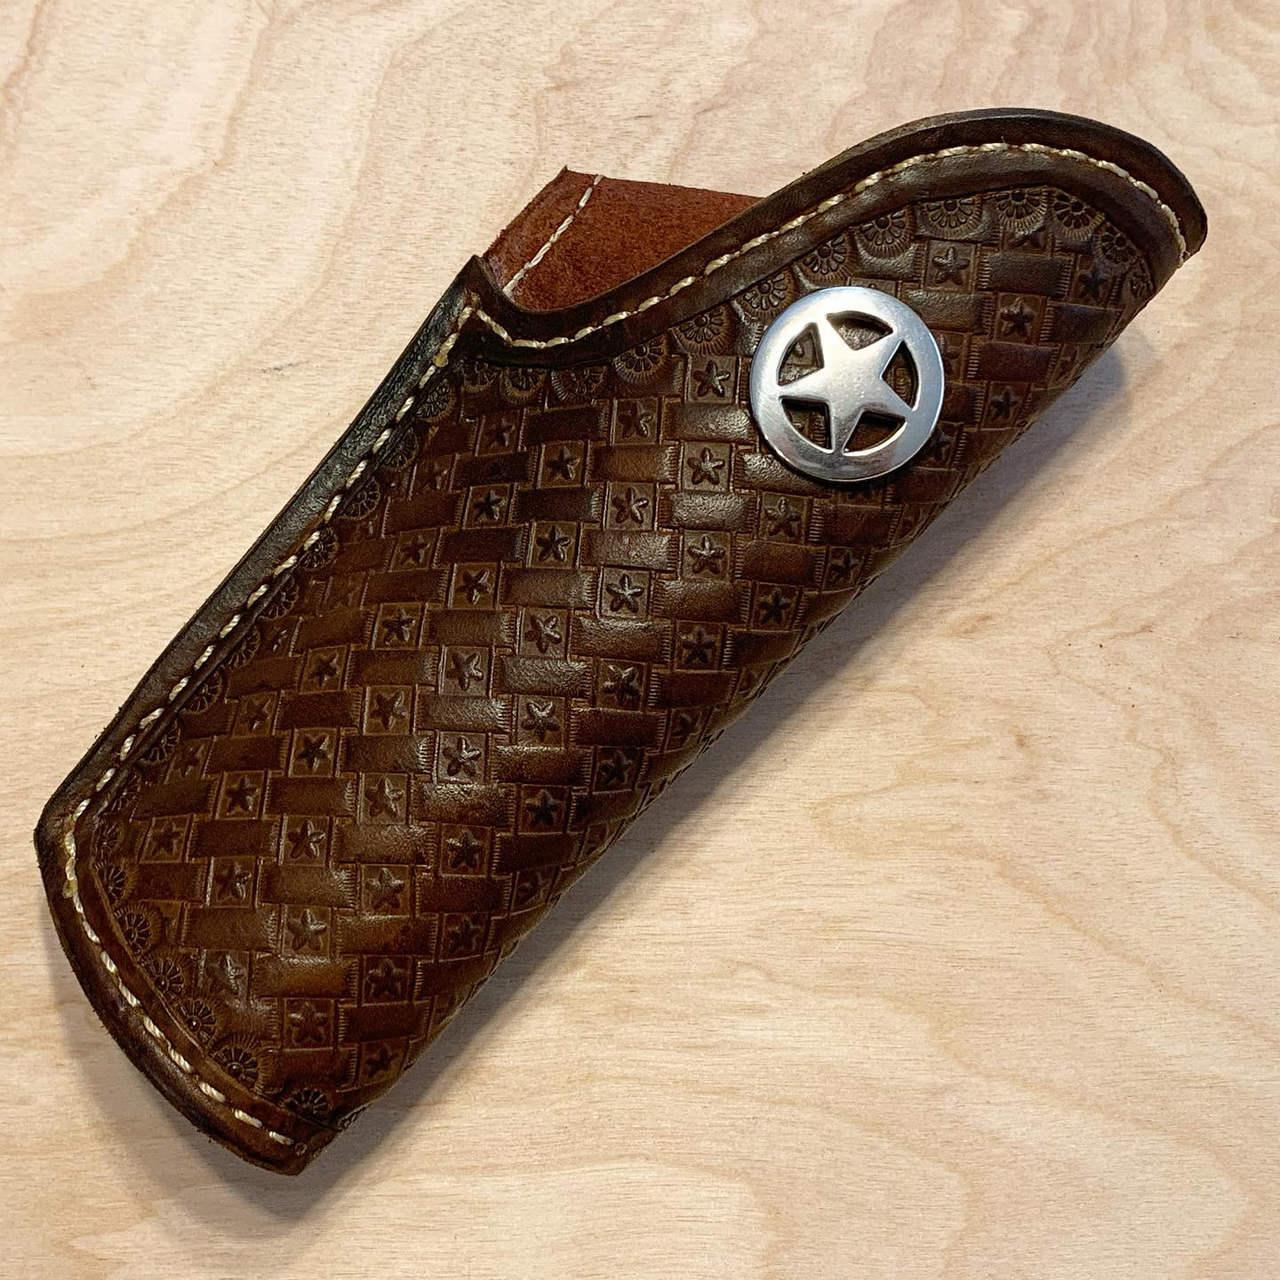 Texas Ranger Inspired Threepersons 1911 Holster - Gun Holsters, Rifle  Slings and Knife Sheathes 